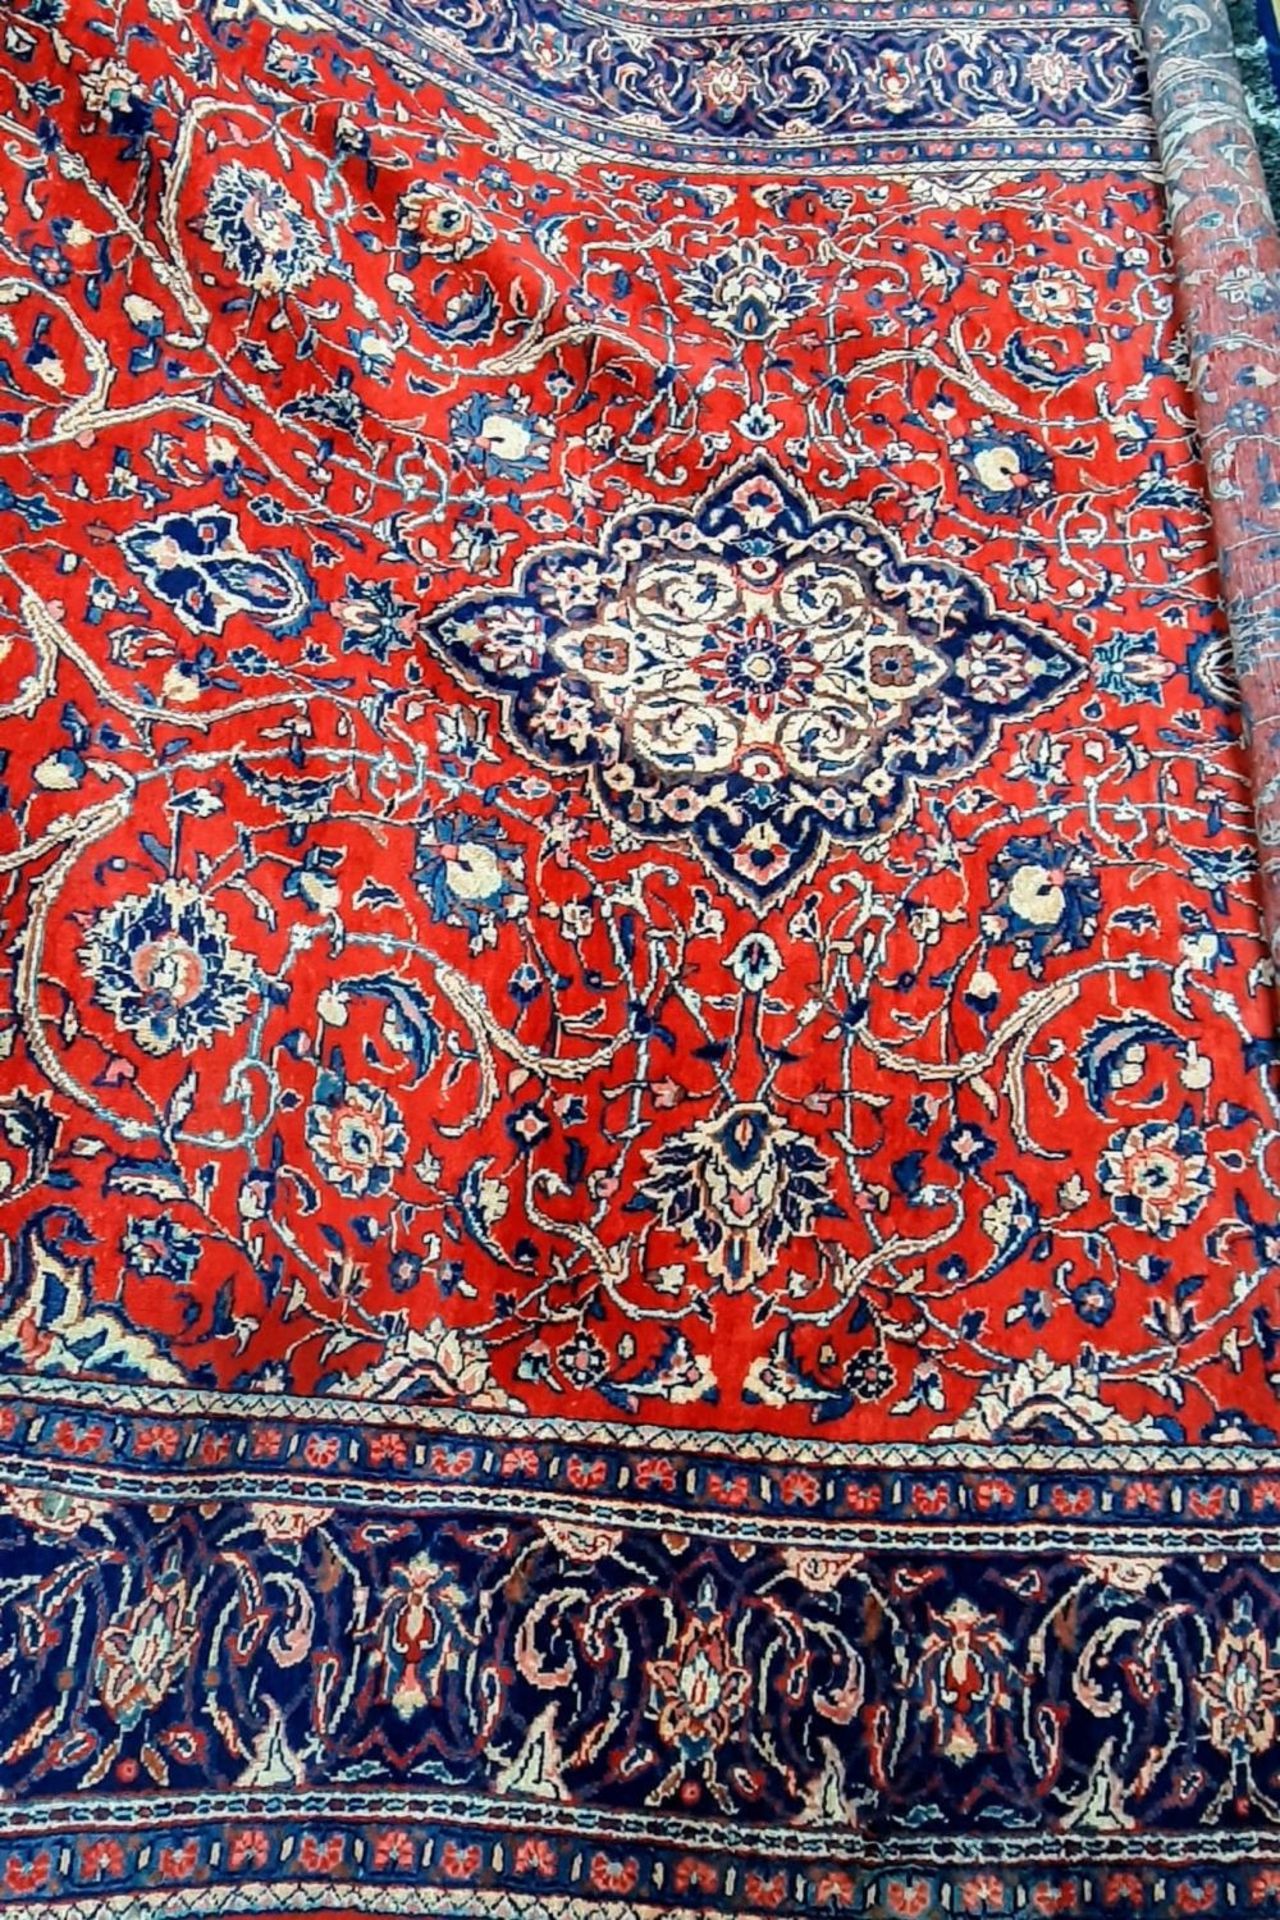 A Brightly Coloured Decorative Persian Sarouk Carpet/Rug. 375cm x 265cm. In good condition. - Image 2 of 2